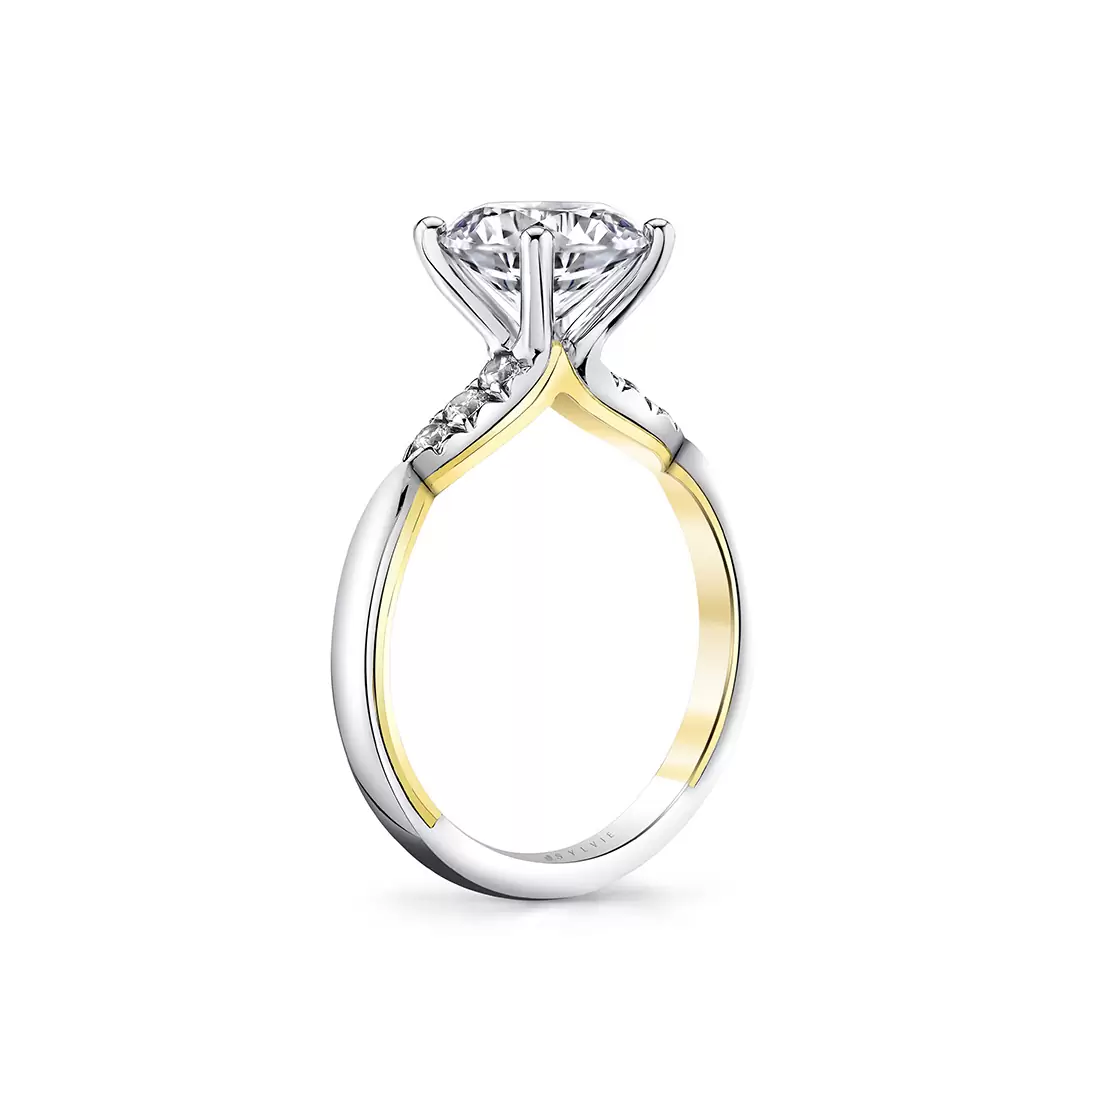 iconelle quarterway pinch two tone engagement ring